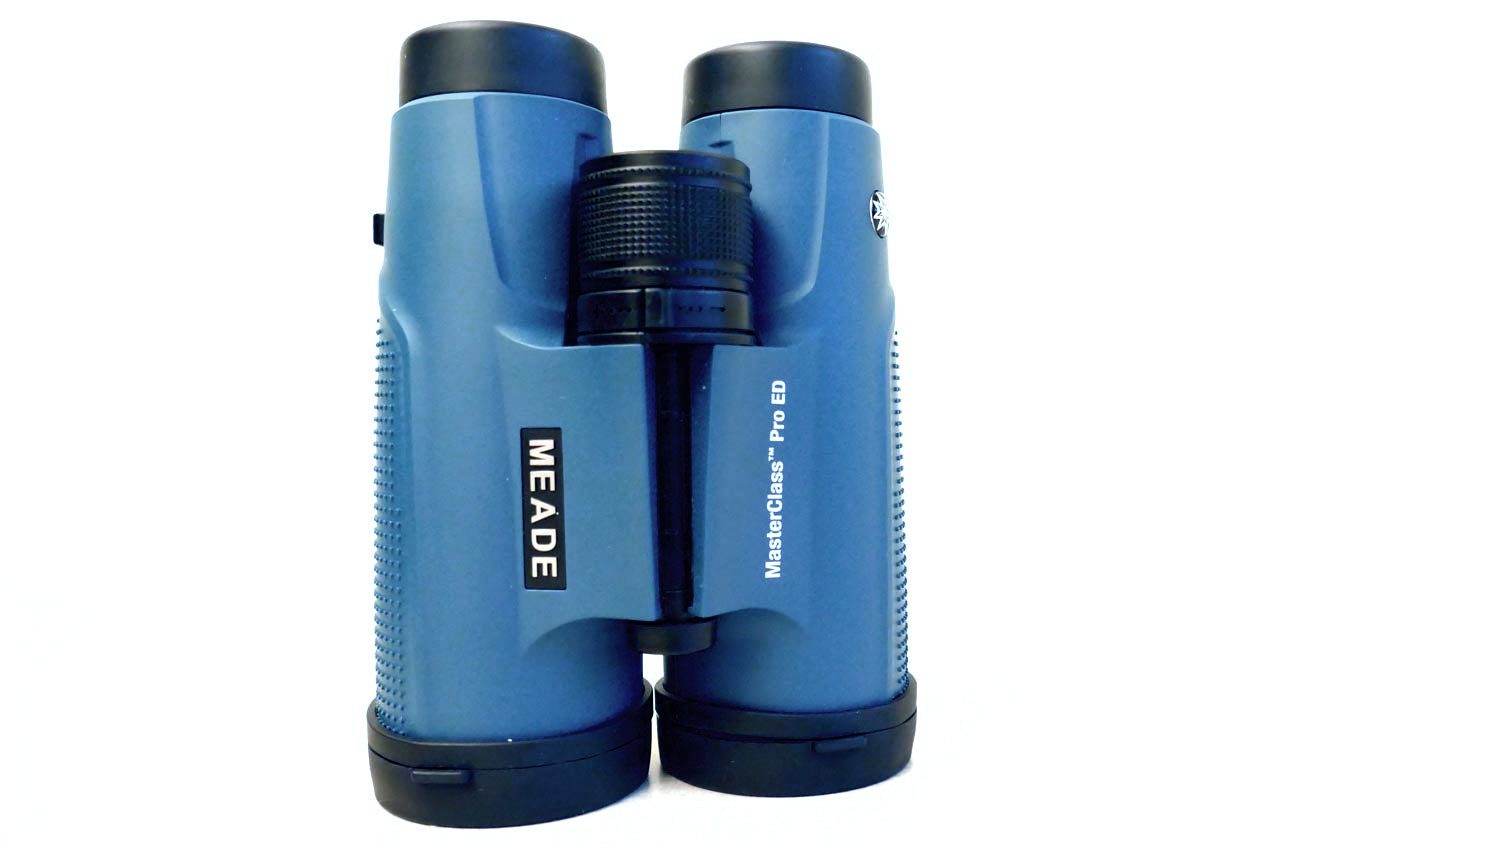 Meade MasterClass Professional ED 8×42 Binoculars: Our Overview